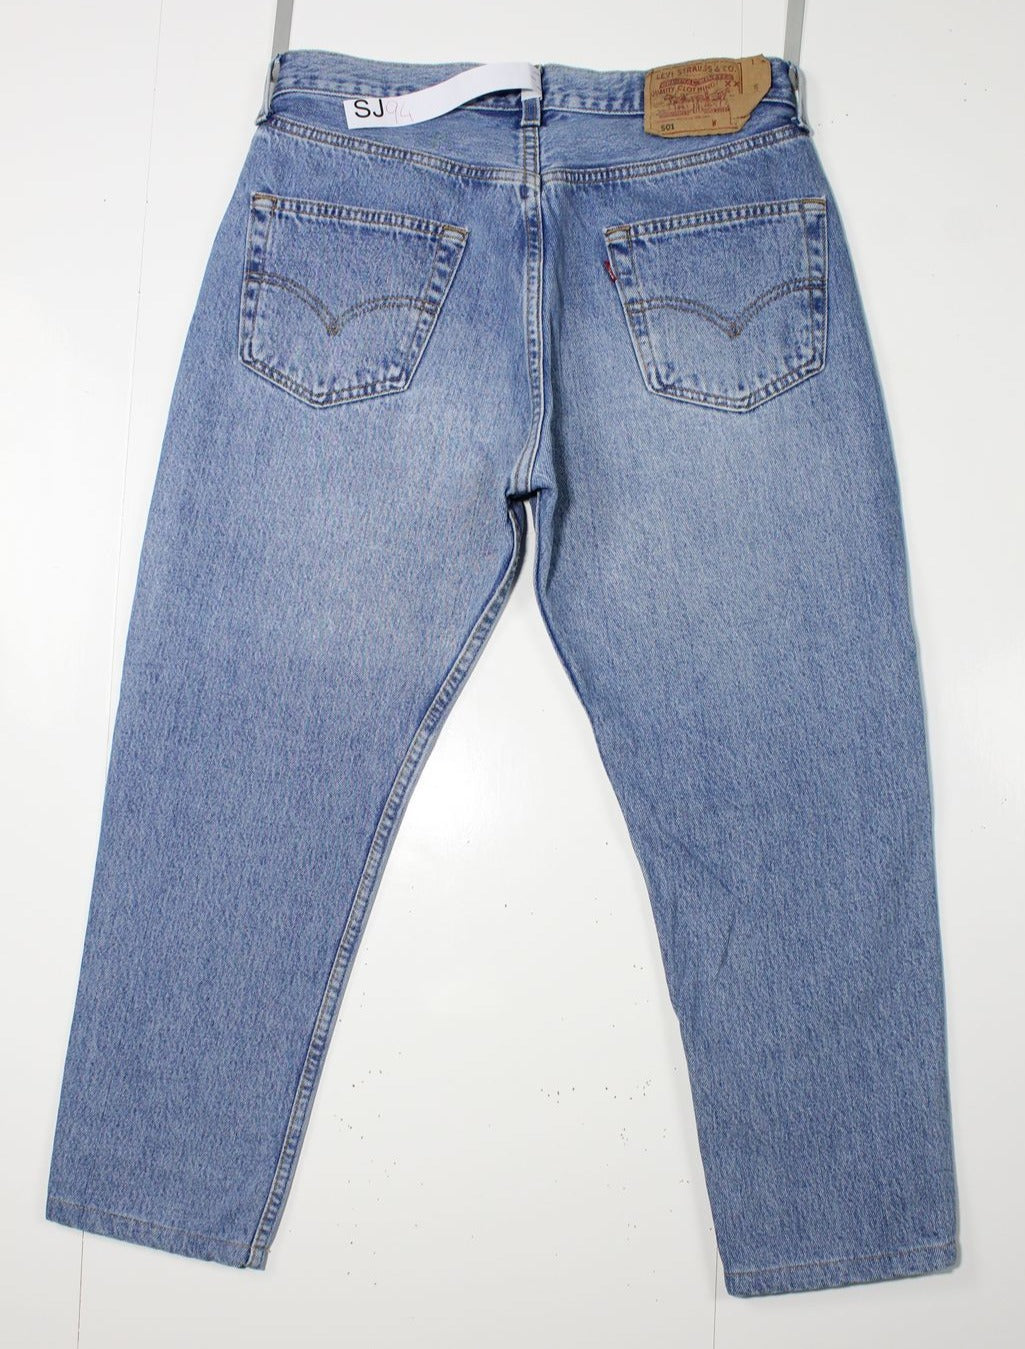 Levi's 501 Made In USA W34 L32 Jeans Vintage